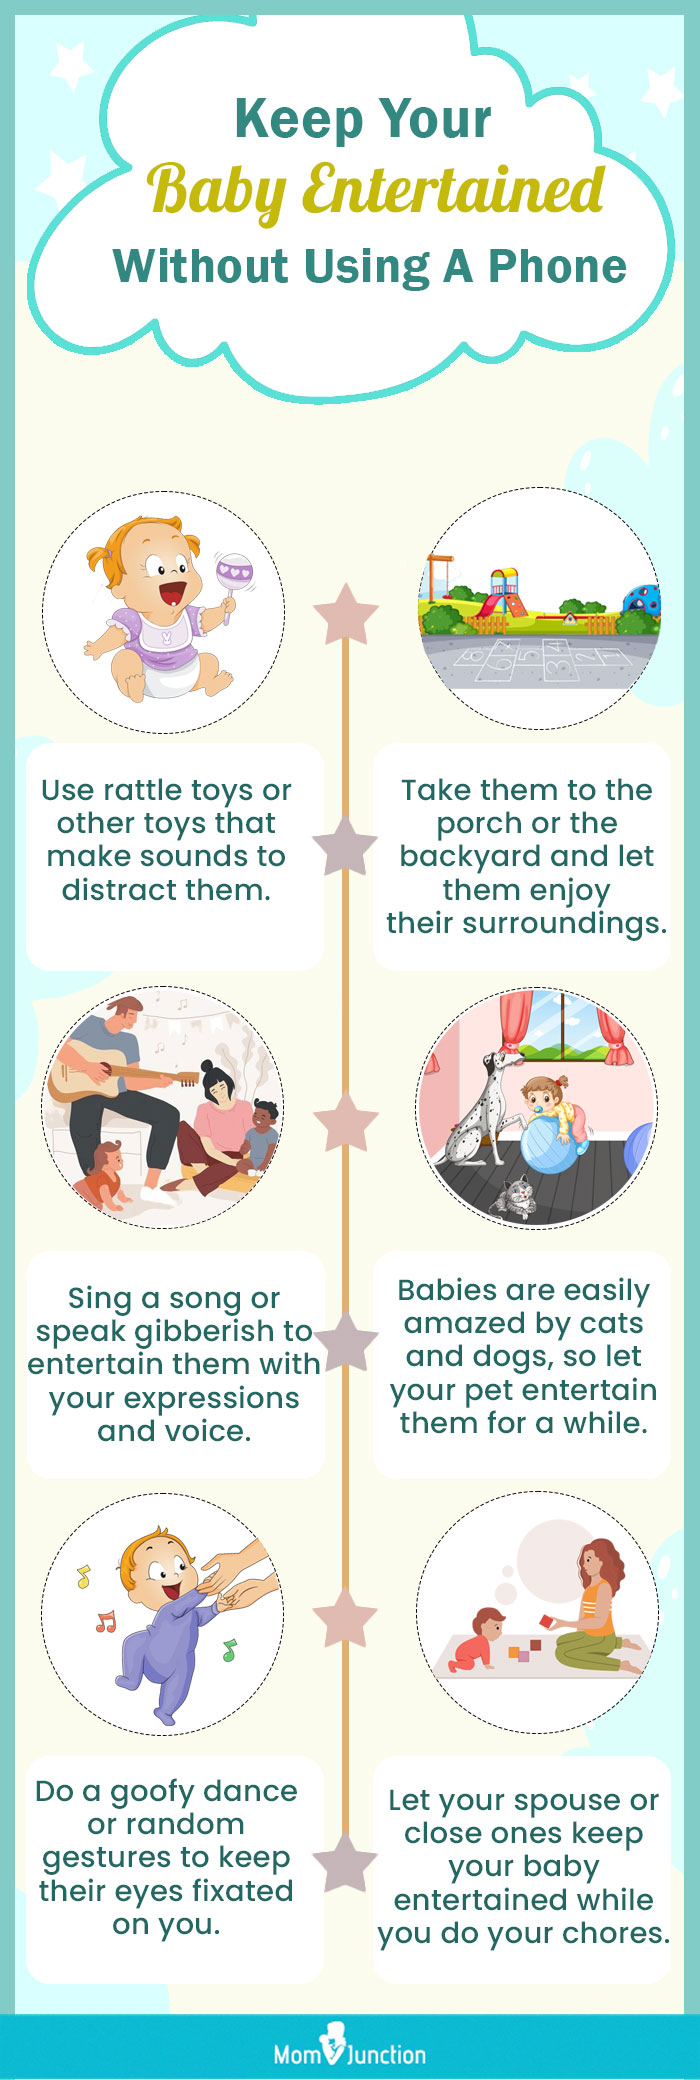 keep your baby entertained without using phone (infographic)